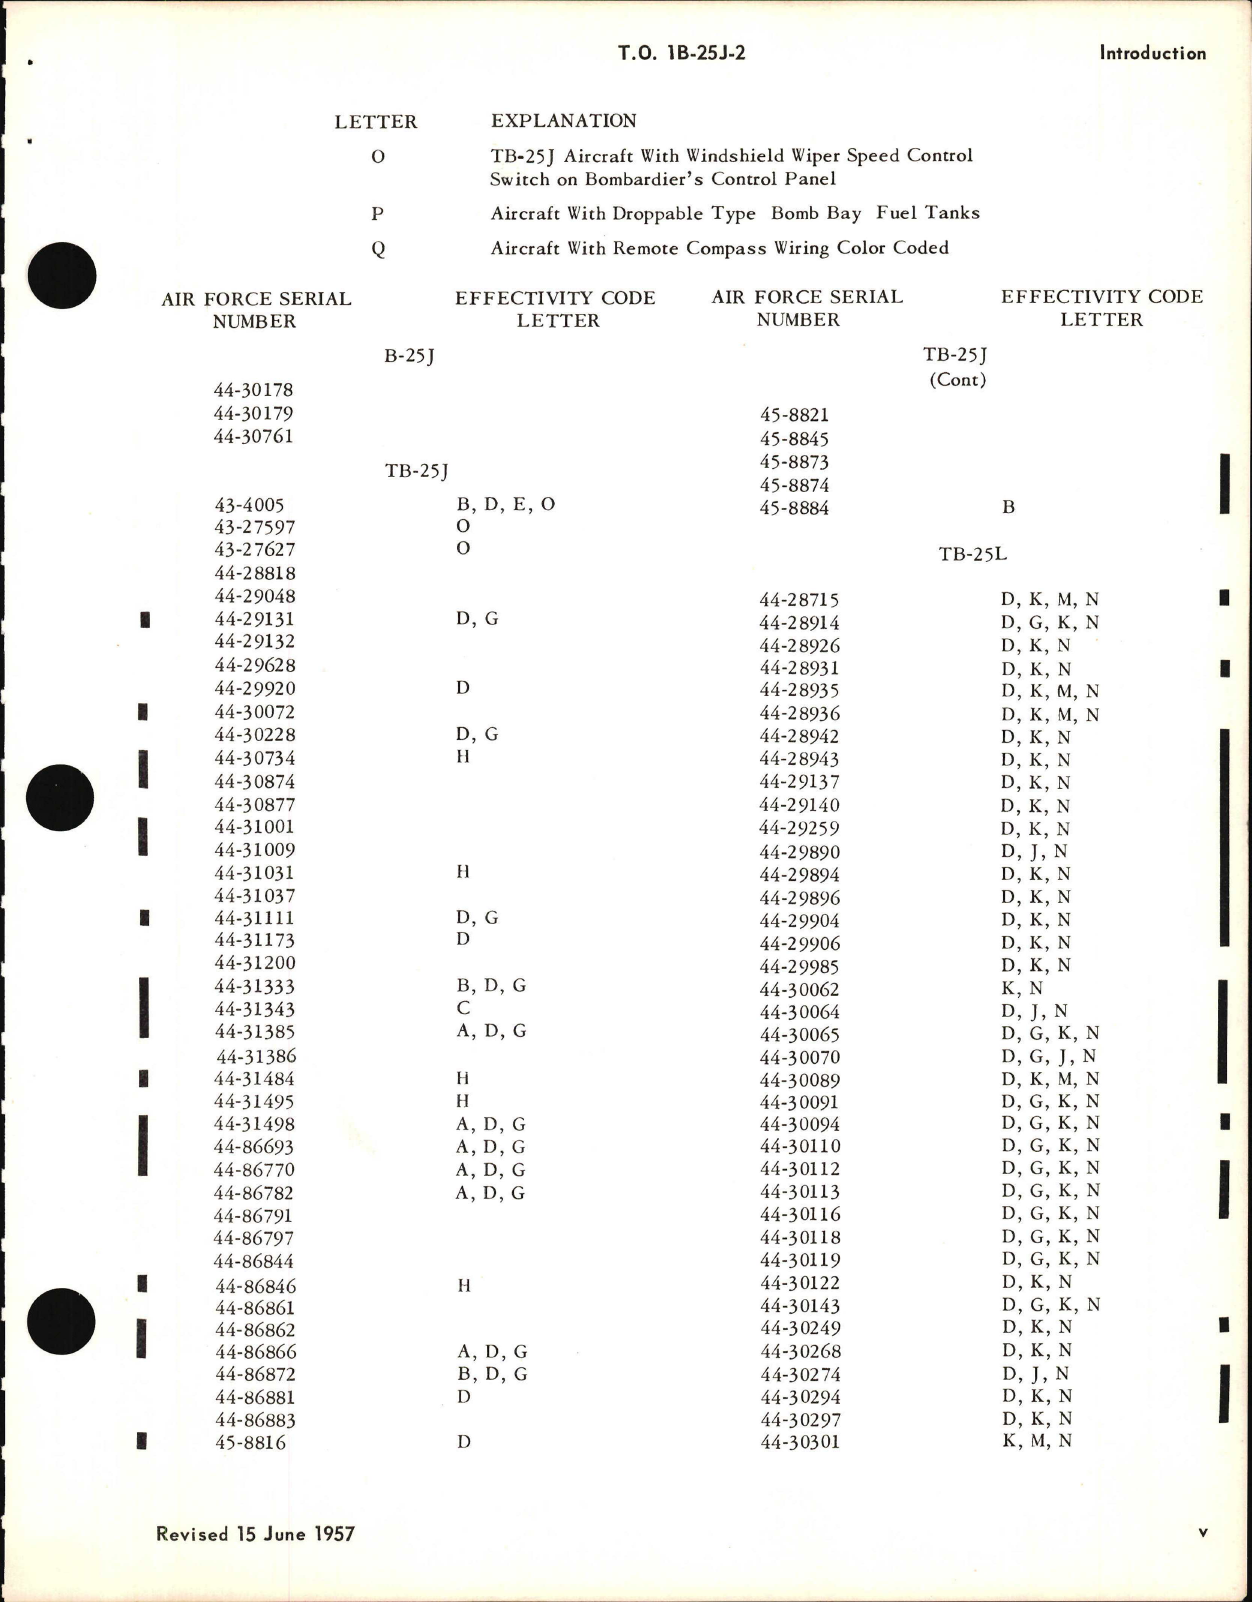 Sample page 5 from AirCorps Library document: Maintenance Instructions for B-25J, TB-25J, TB-25L-1, and TB-25N